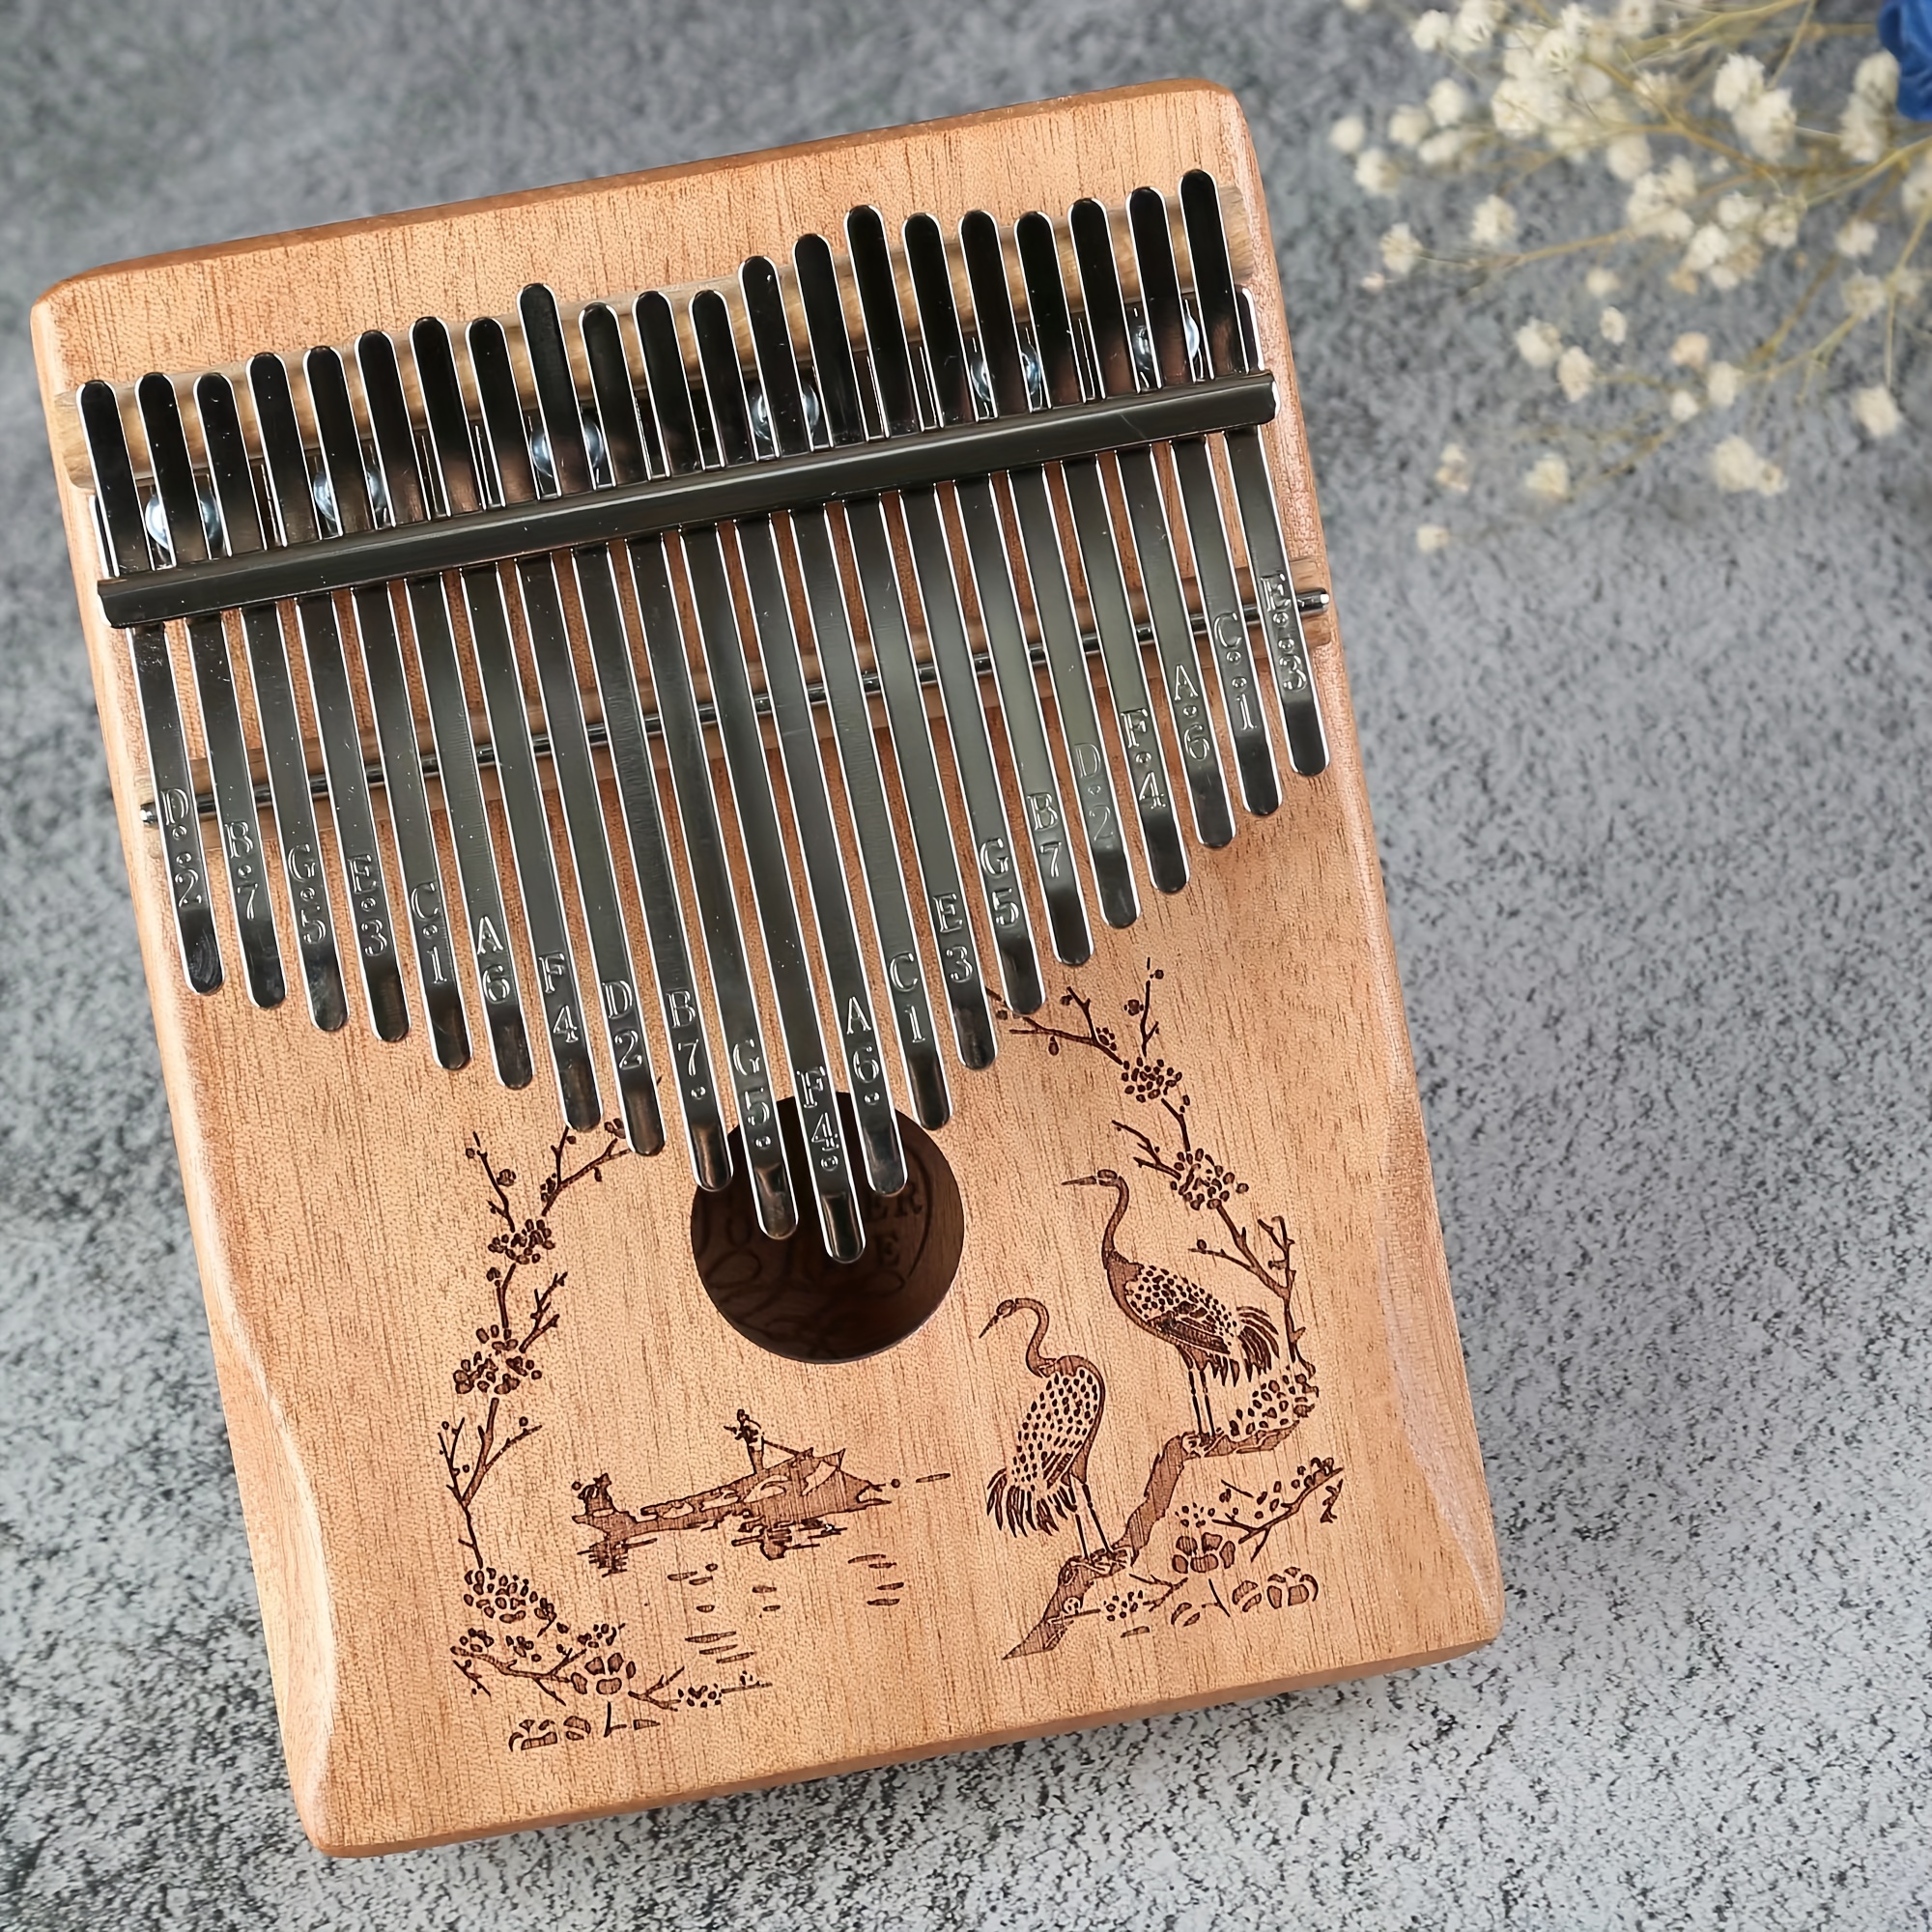 17-Key Kalimba with Chain for Beautiful Sound Effects and Easy Portability